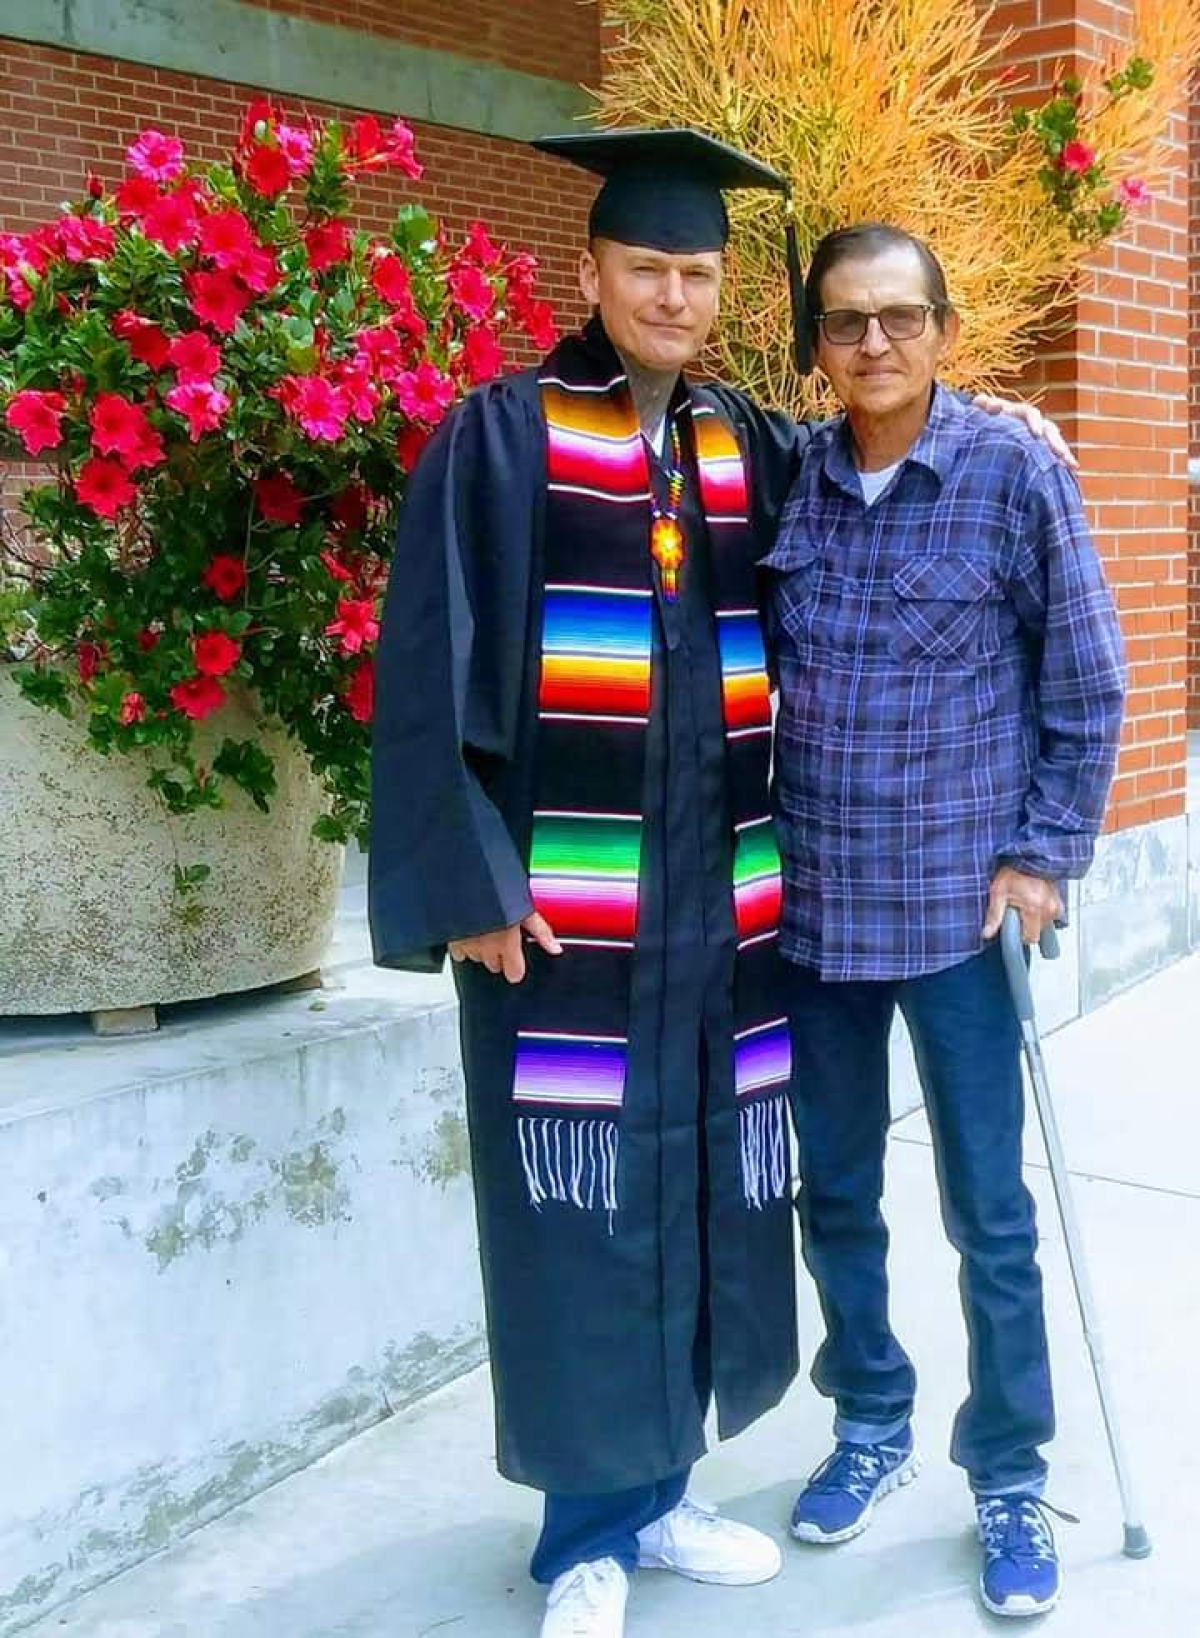 Ryan Rising with his dad at his graduation from San Diego City College in 2019.